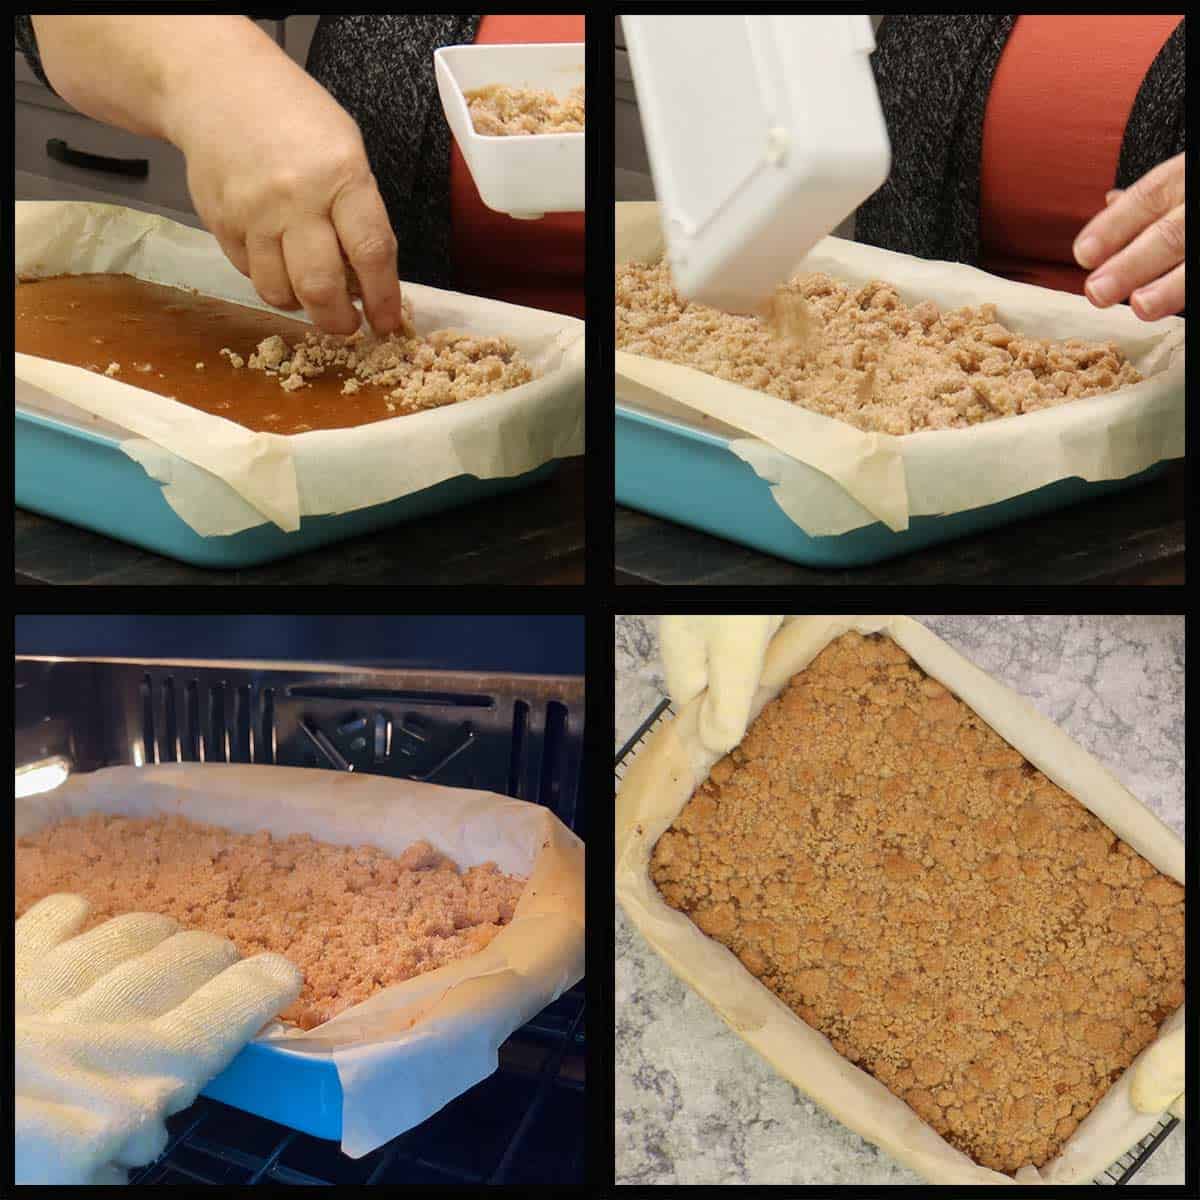 putting the crumble on top, baking it and then cooling it on a cooling rack.